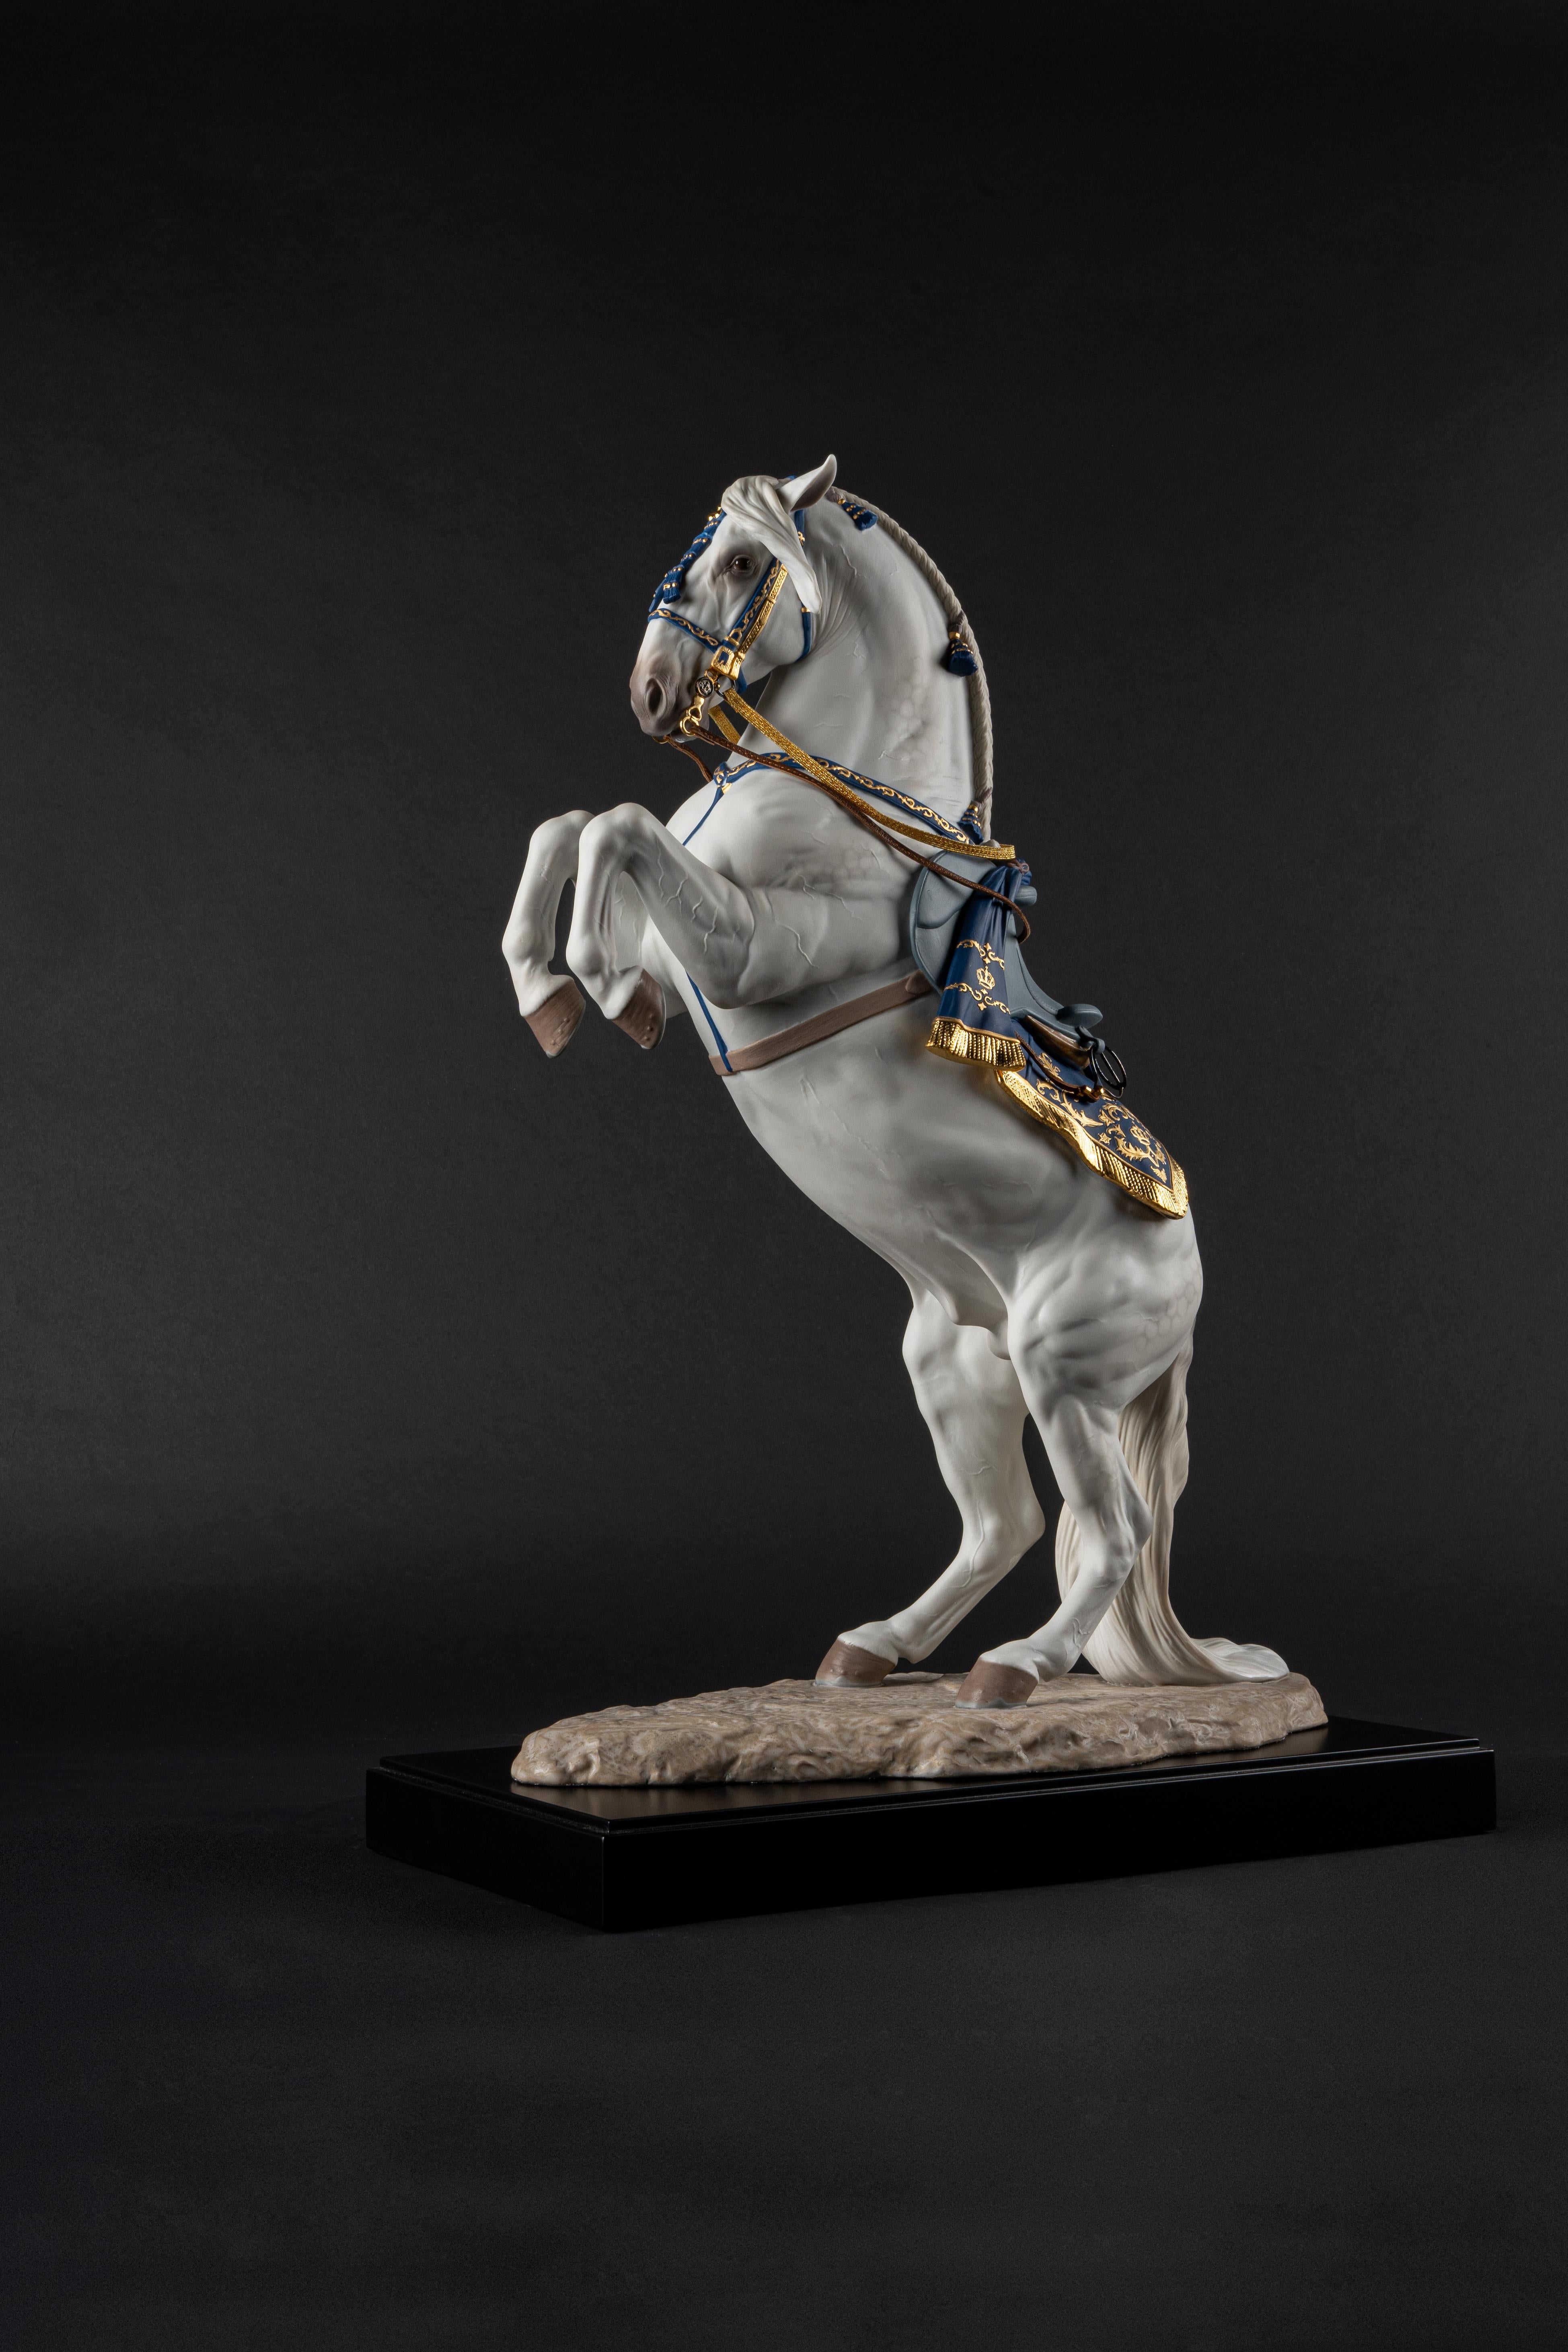 Spanish Pure Breed Sculpture, Haute École, Limited Edition For Sale 2